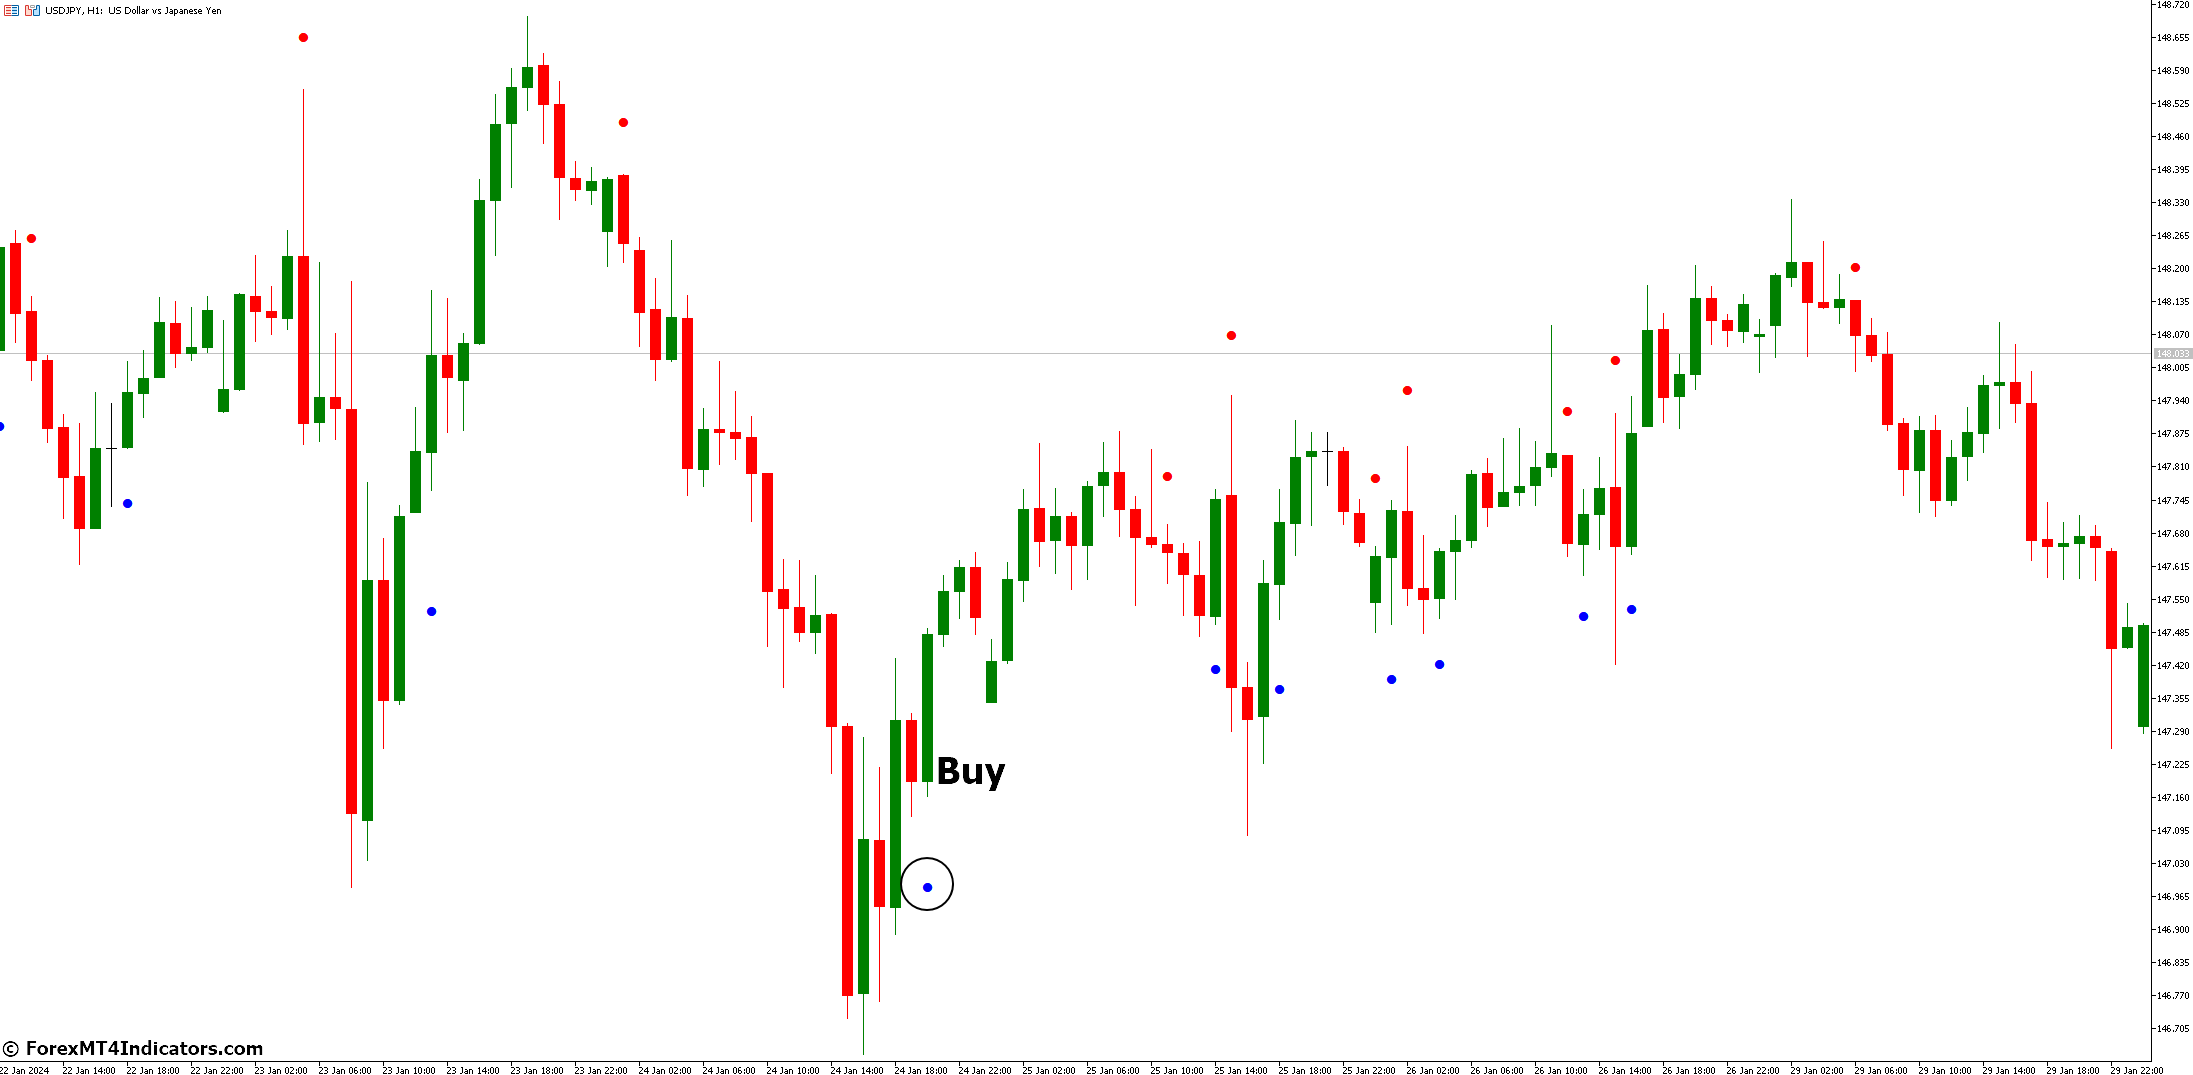 How to Trade with CCI Arrows Indicator - Buy Entry